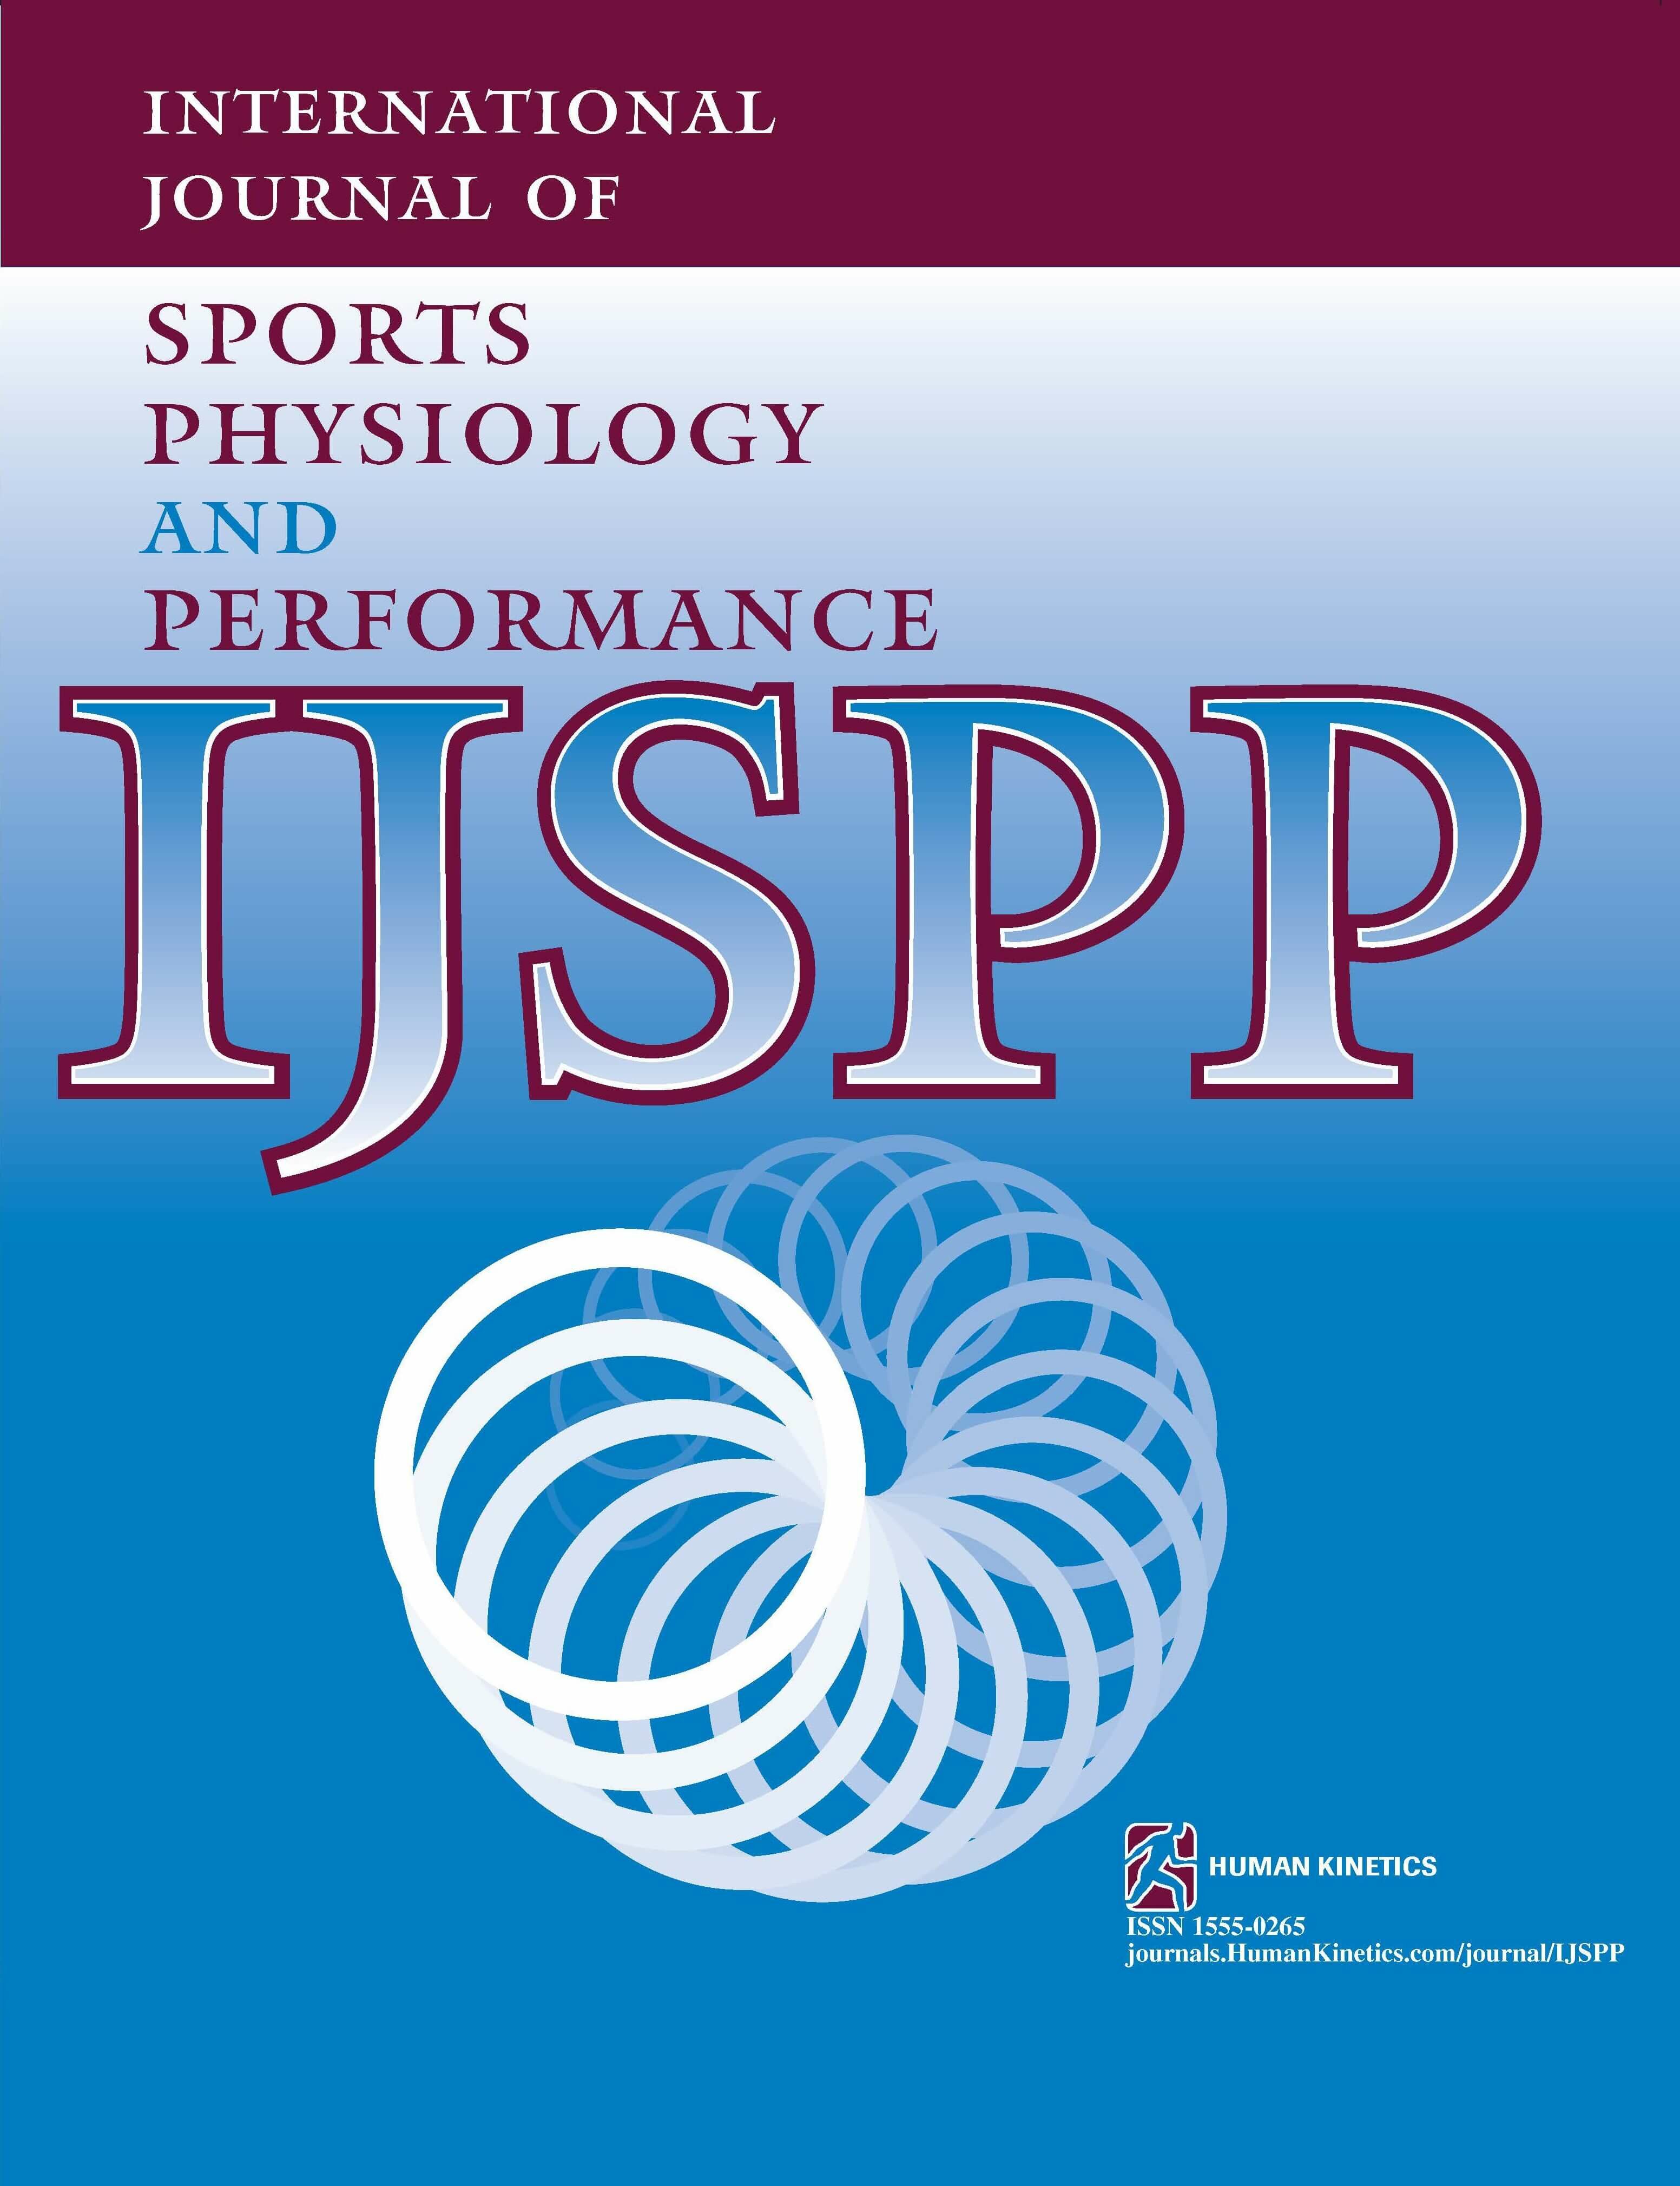 The Dose–Response in Elite Soccer: Preliminary Insights From Menstrual-Cycle Tracking During the FIFA Women’s World Cup 2019